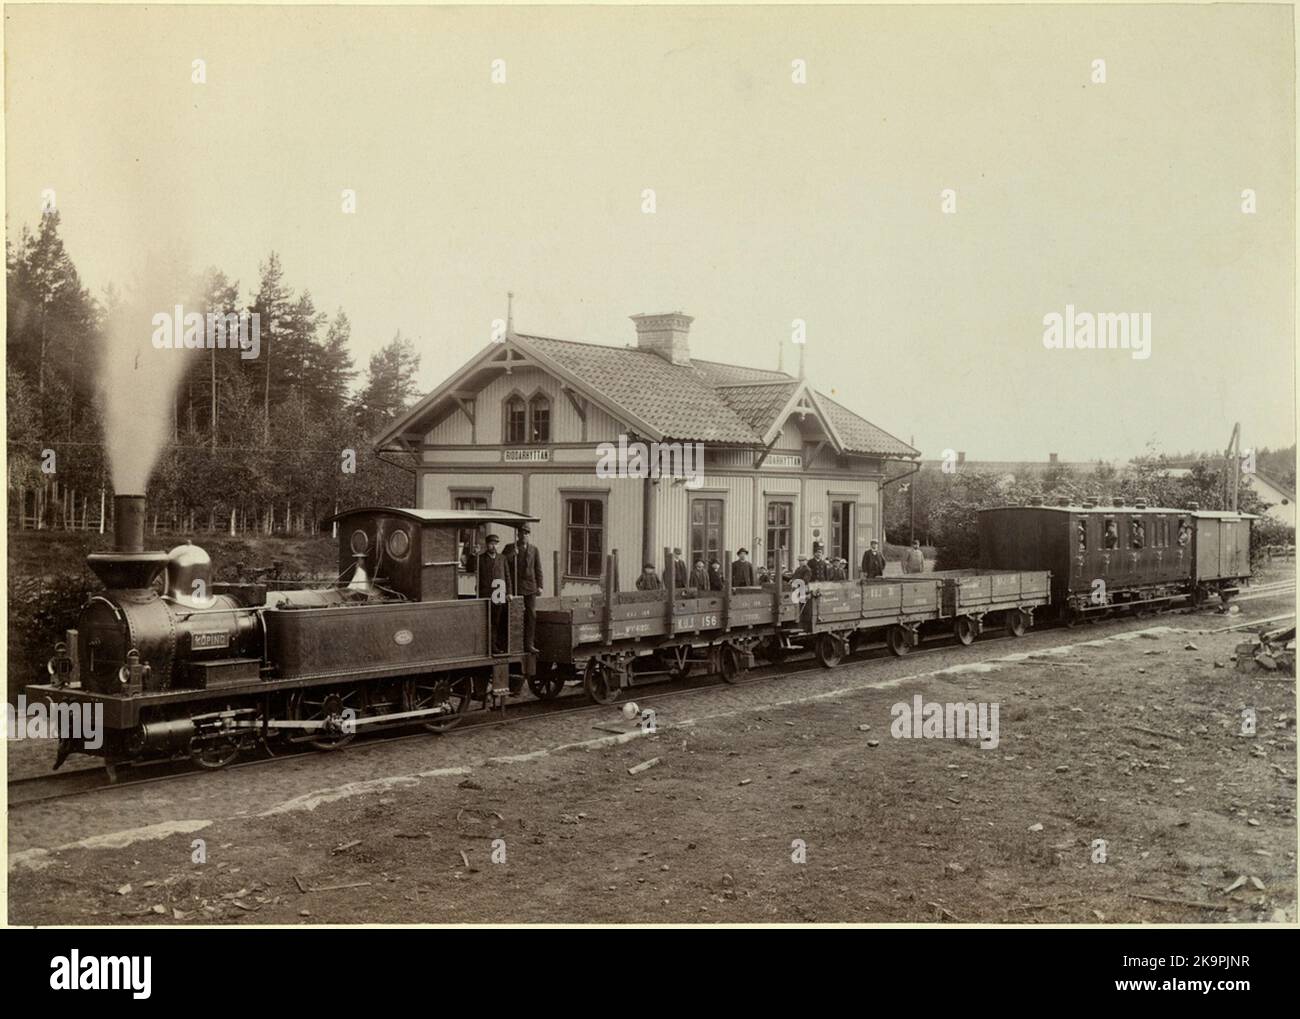 Riddarhyttan old station by train towards Köping. Köping Uttersbergs Railway Kuj Lok 1 'Köping'. The second last wagon is BCO no. 11. Svergie's second bow wedge delivered from Atlas in 1884. Stock Photo